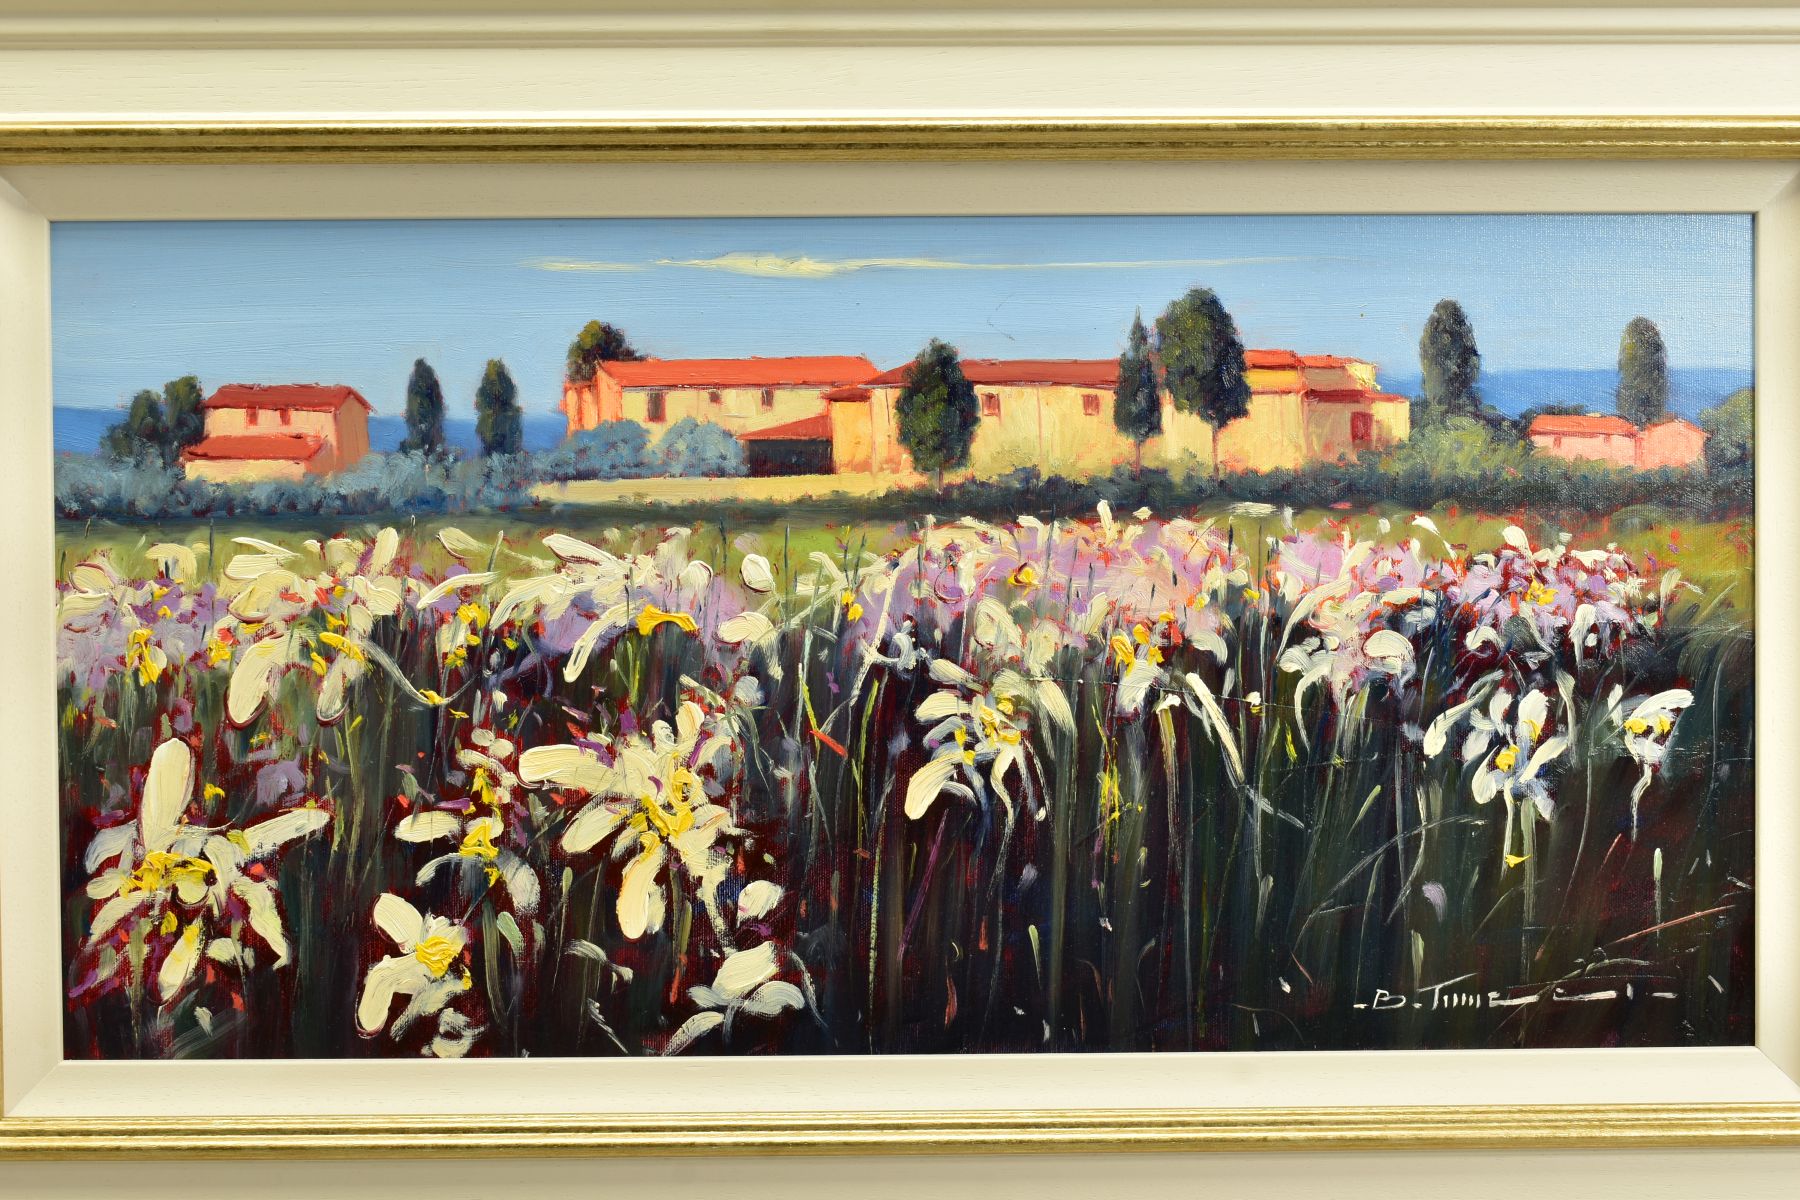 BRUNO TINUCCI (ITALY 19470) 'CAMPO BIANCO', an Italian landscape of flowers with buildings beyond, - Image 2 of 8